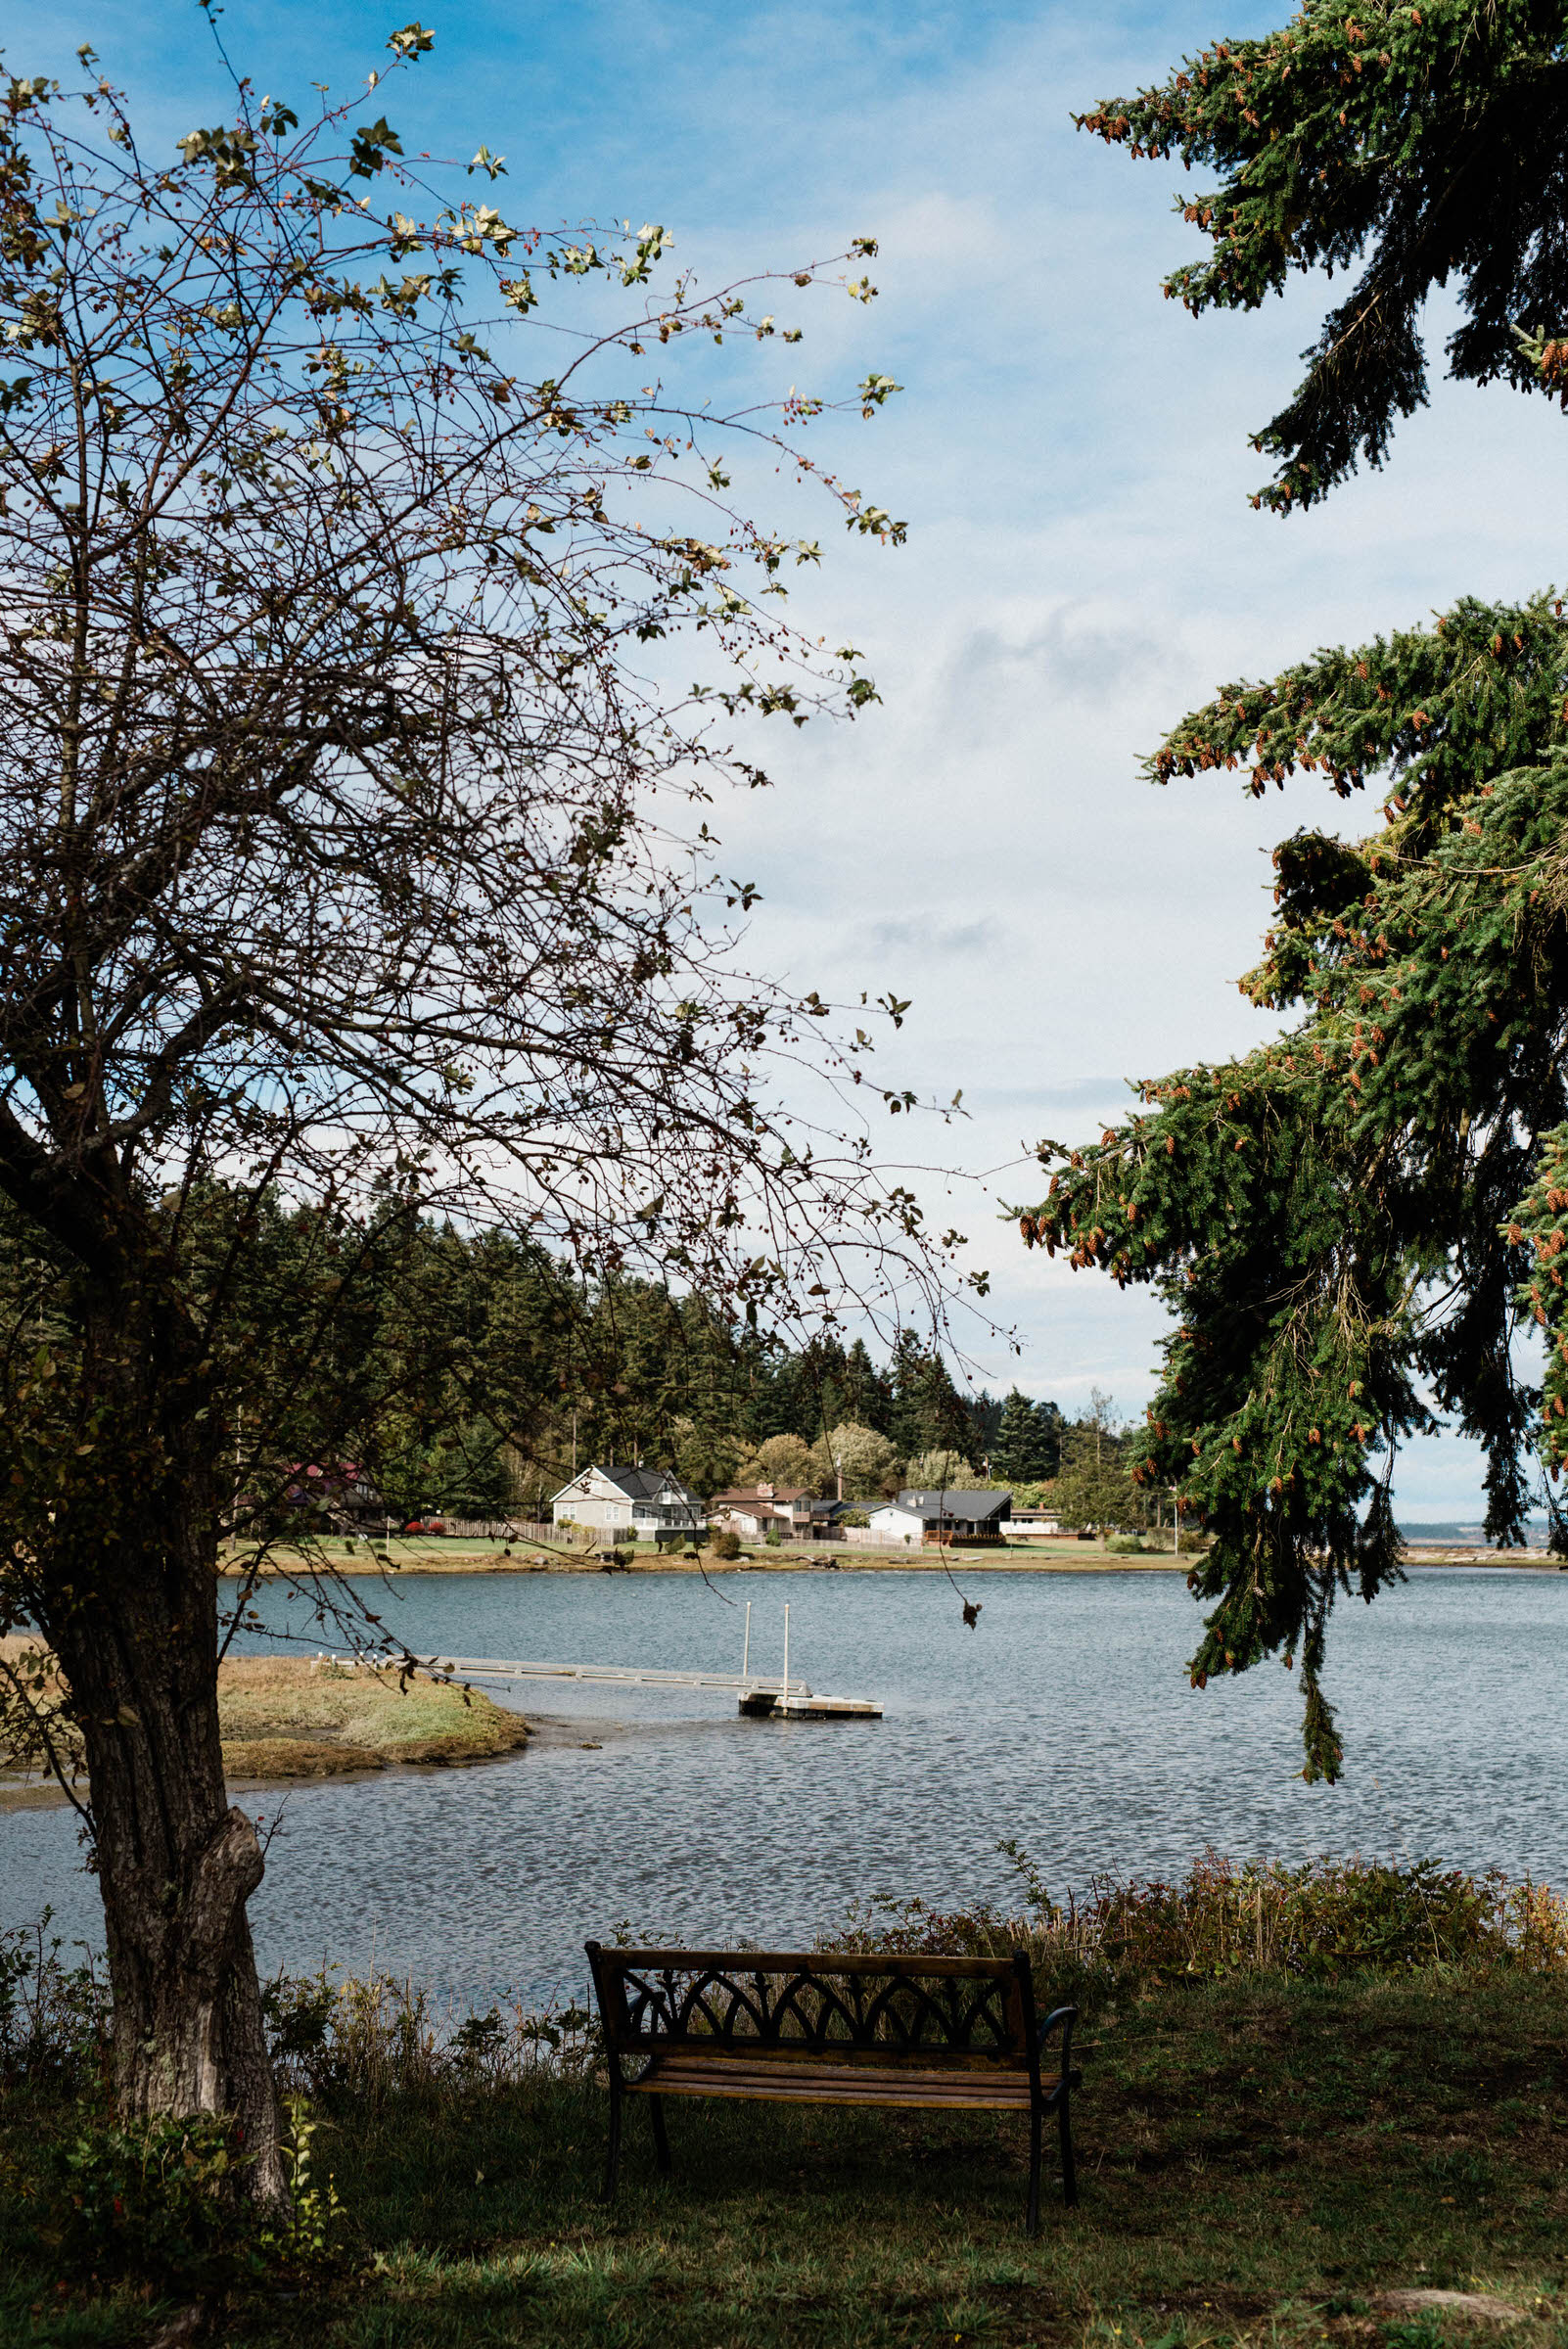 A Romantic Whidbey Island wedding: Andrea and Rod